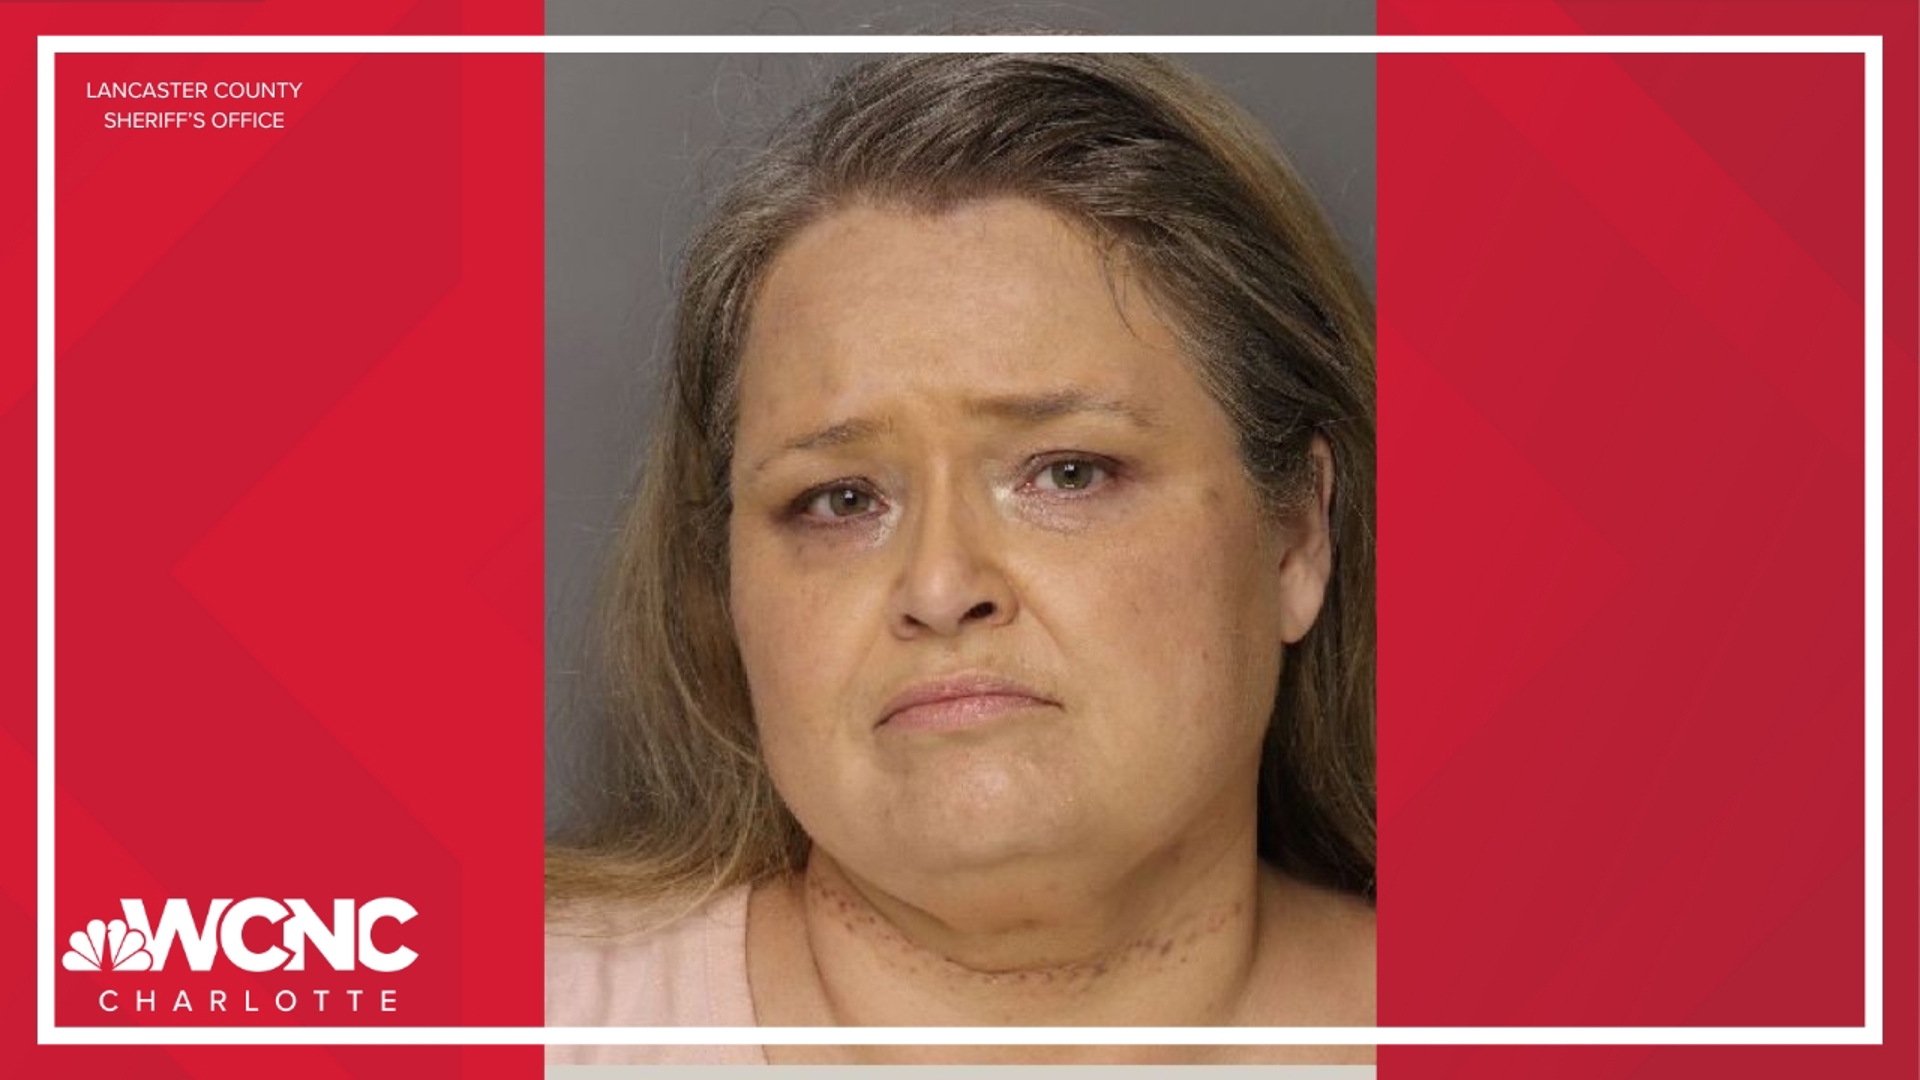 Amanda Dee Ann Henry, 48, was charged in May for the April incident.